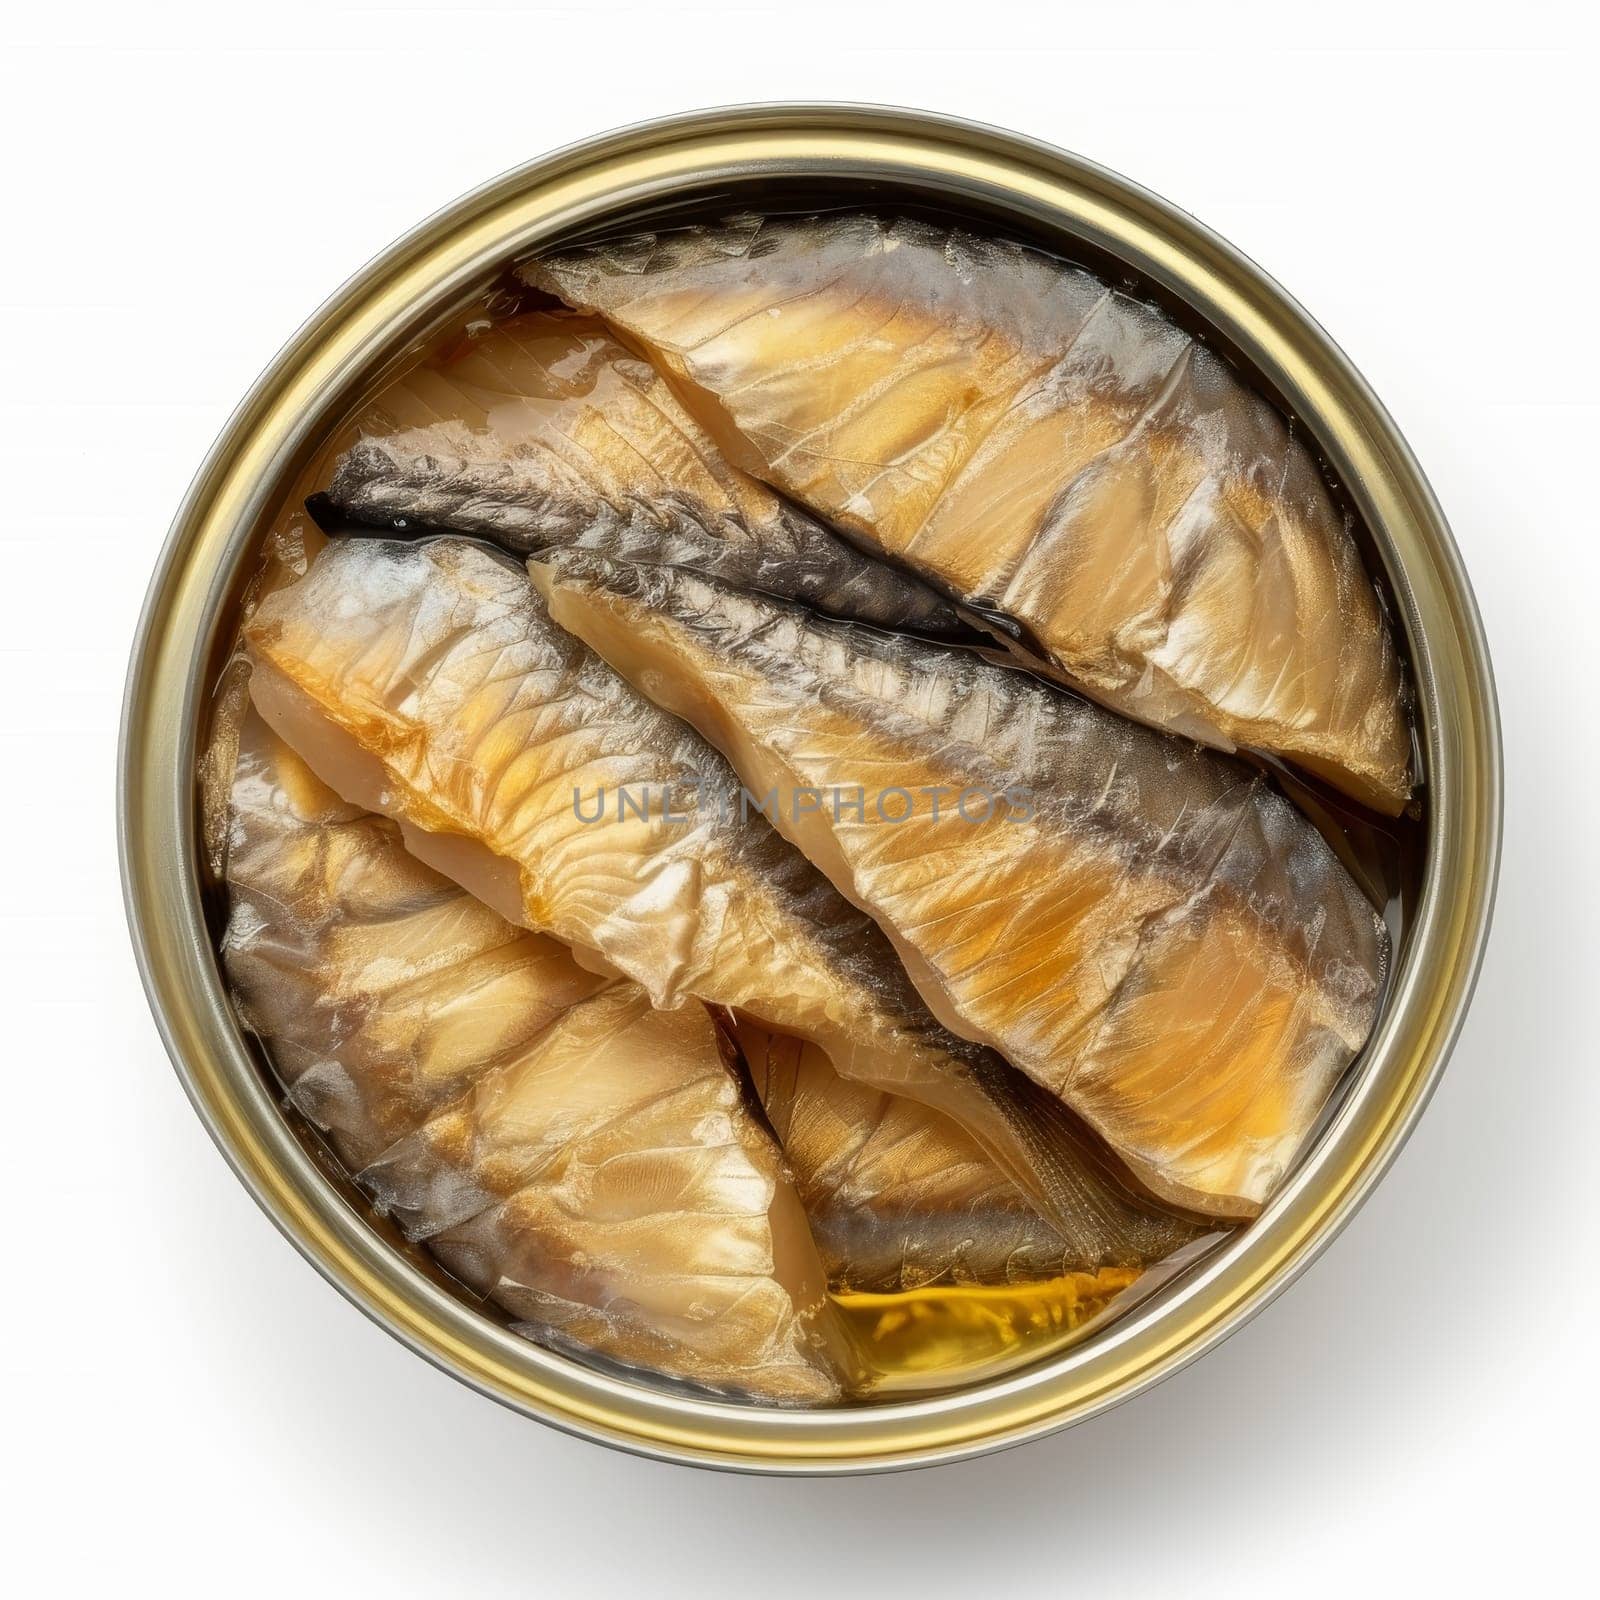 Overhead view of canned fish fillets immersed in oil, captured against a white backdrop.